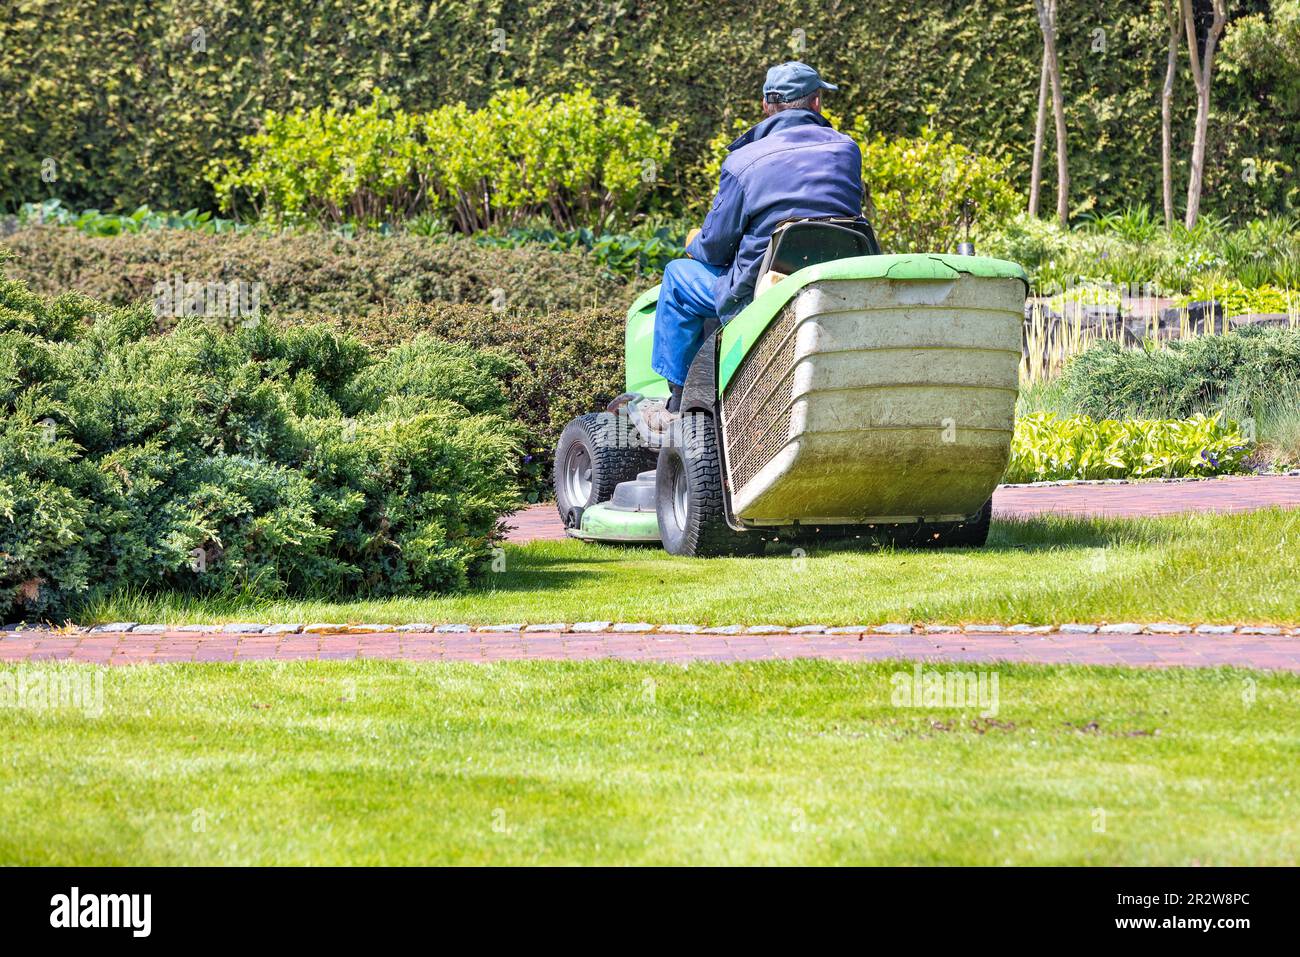 A working gardener drives a tractor lawn mower and mows the green grass of the lawn against a blurred background of a spring garden. Copy space. Stock Photo